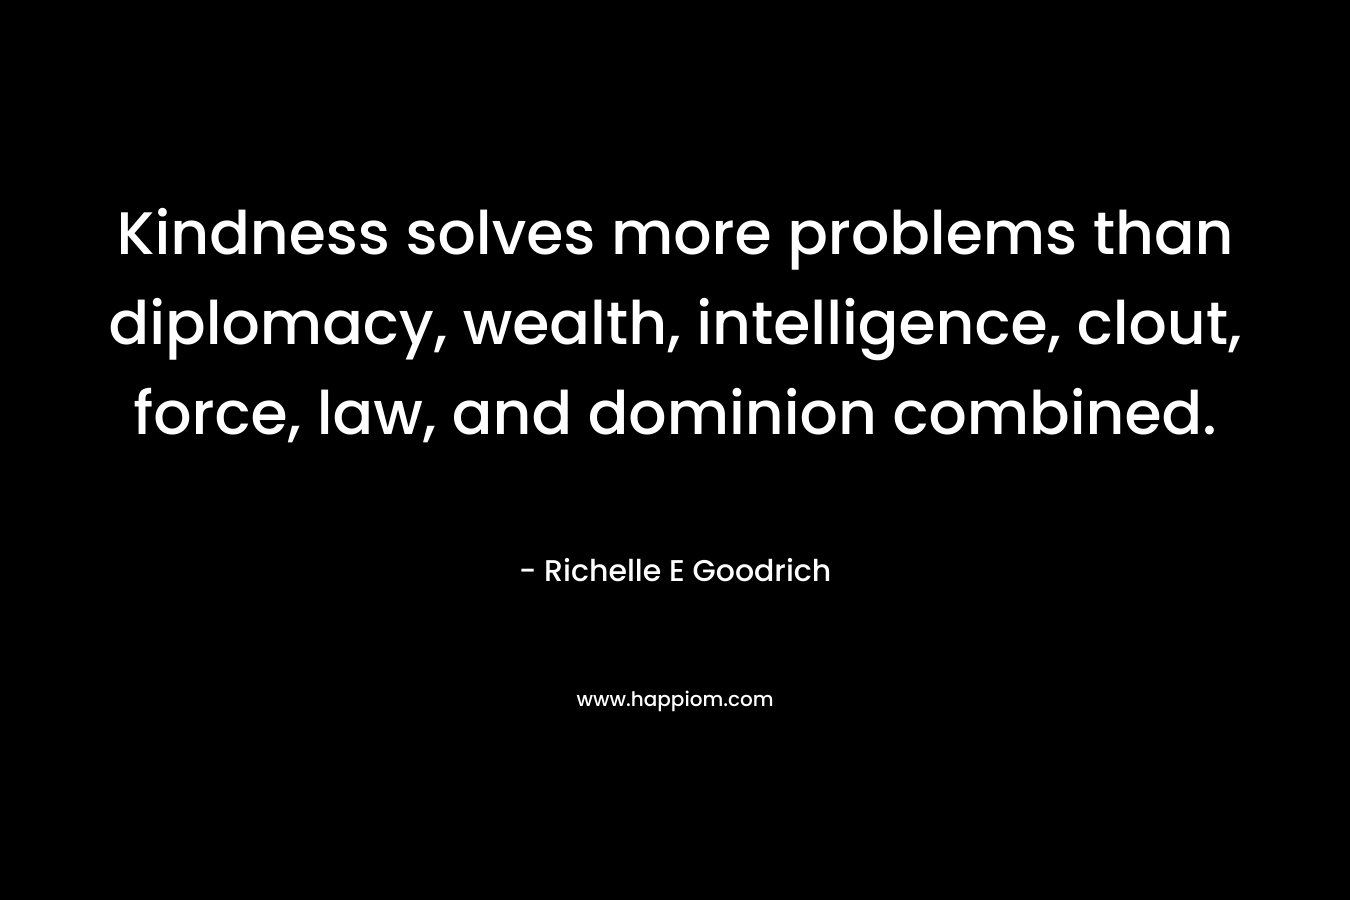 Kindness solves more problems than diplomacy, wealth, intelligence, clout, force, law, and dominion combined. – Richelle E Goodrich